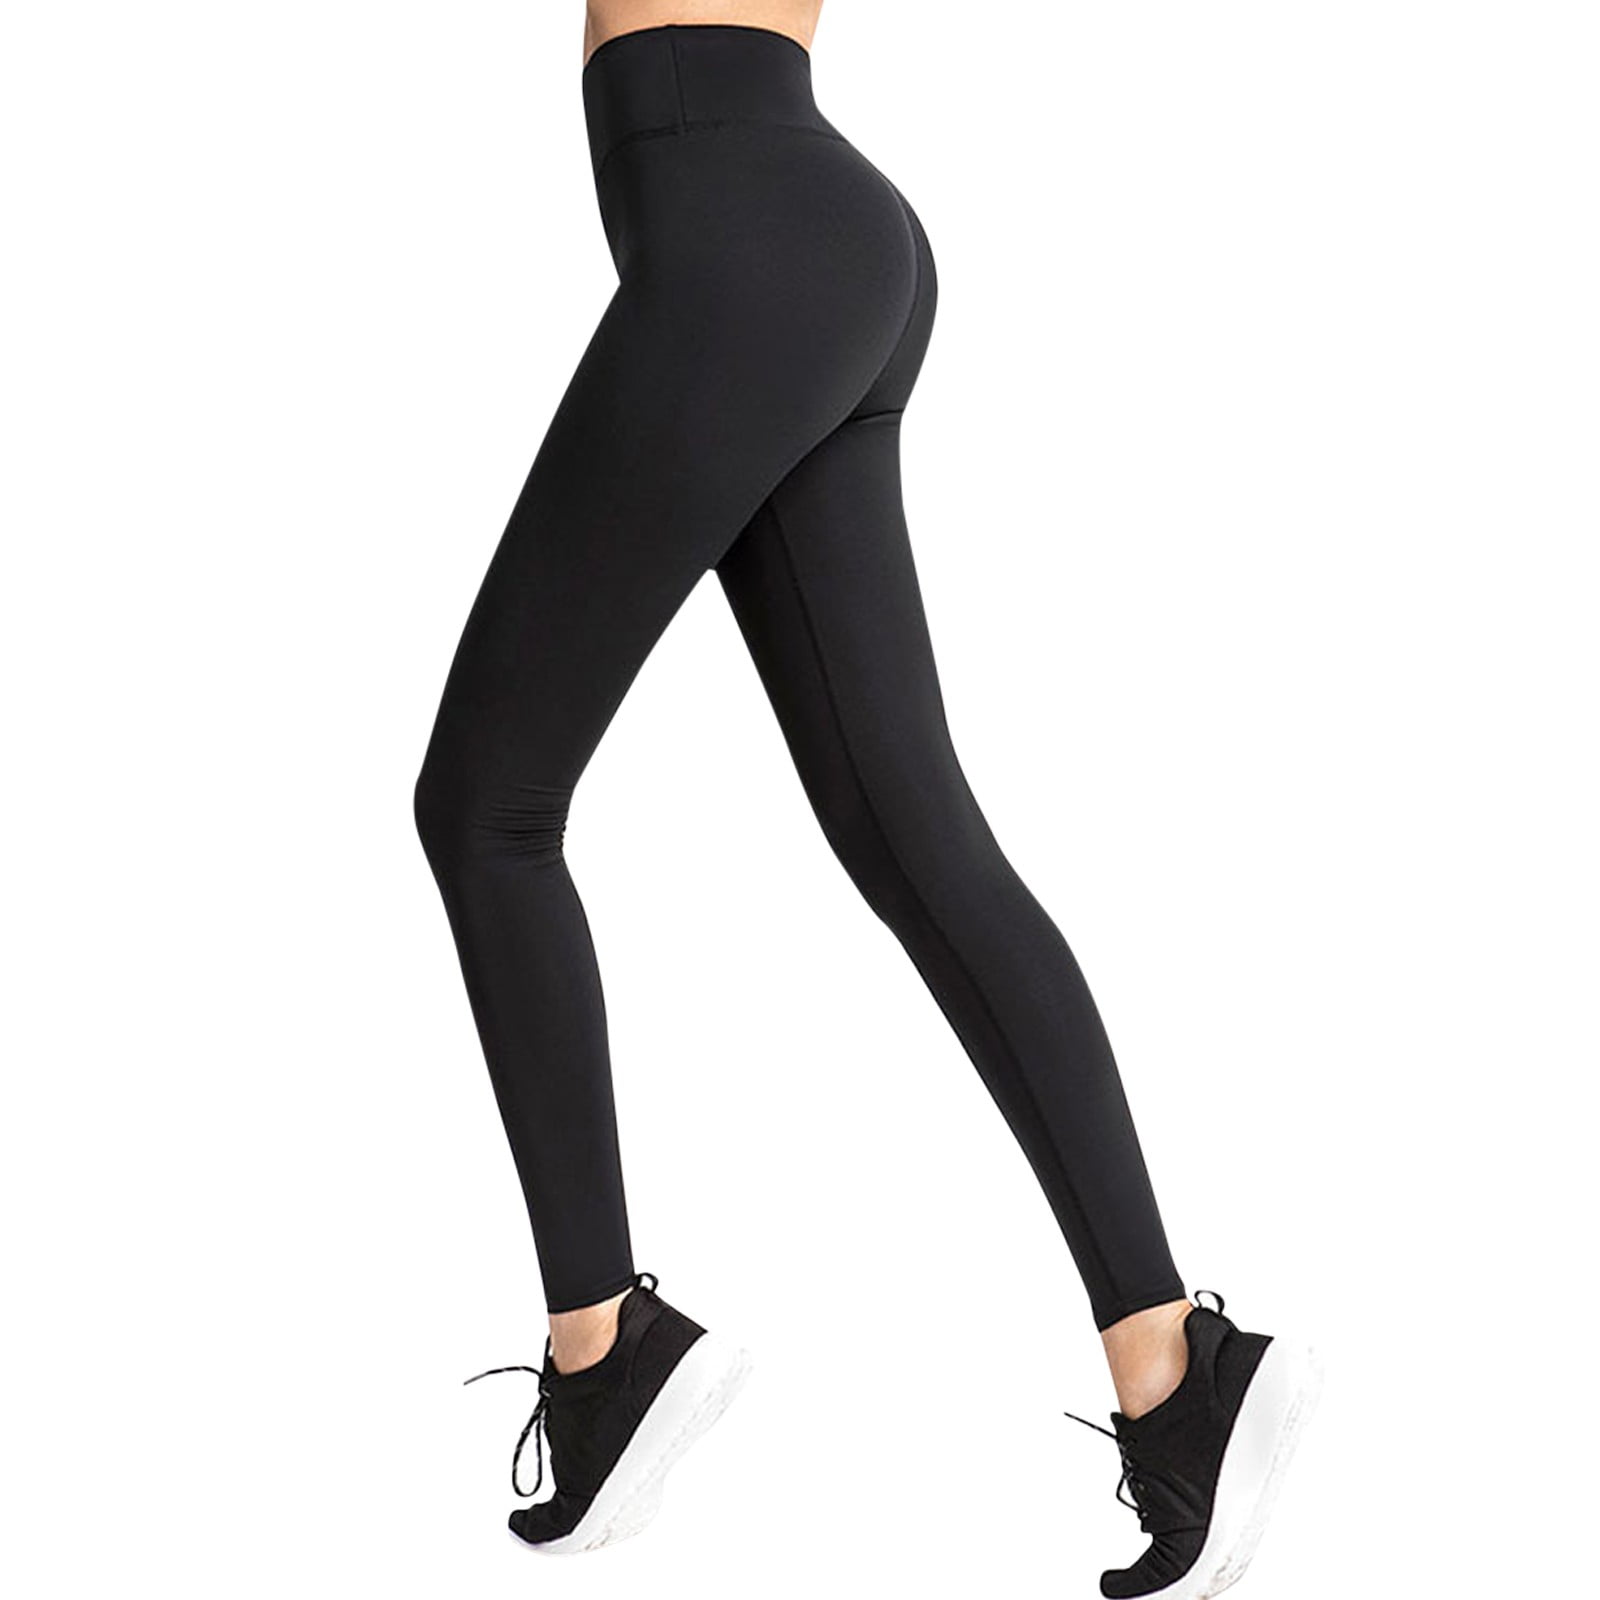 Women's Leggings, Buttery Soft High Waisted Yoga Pants with TummyControl  for Workout and Fitness S-3XL